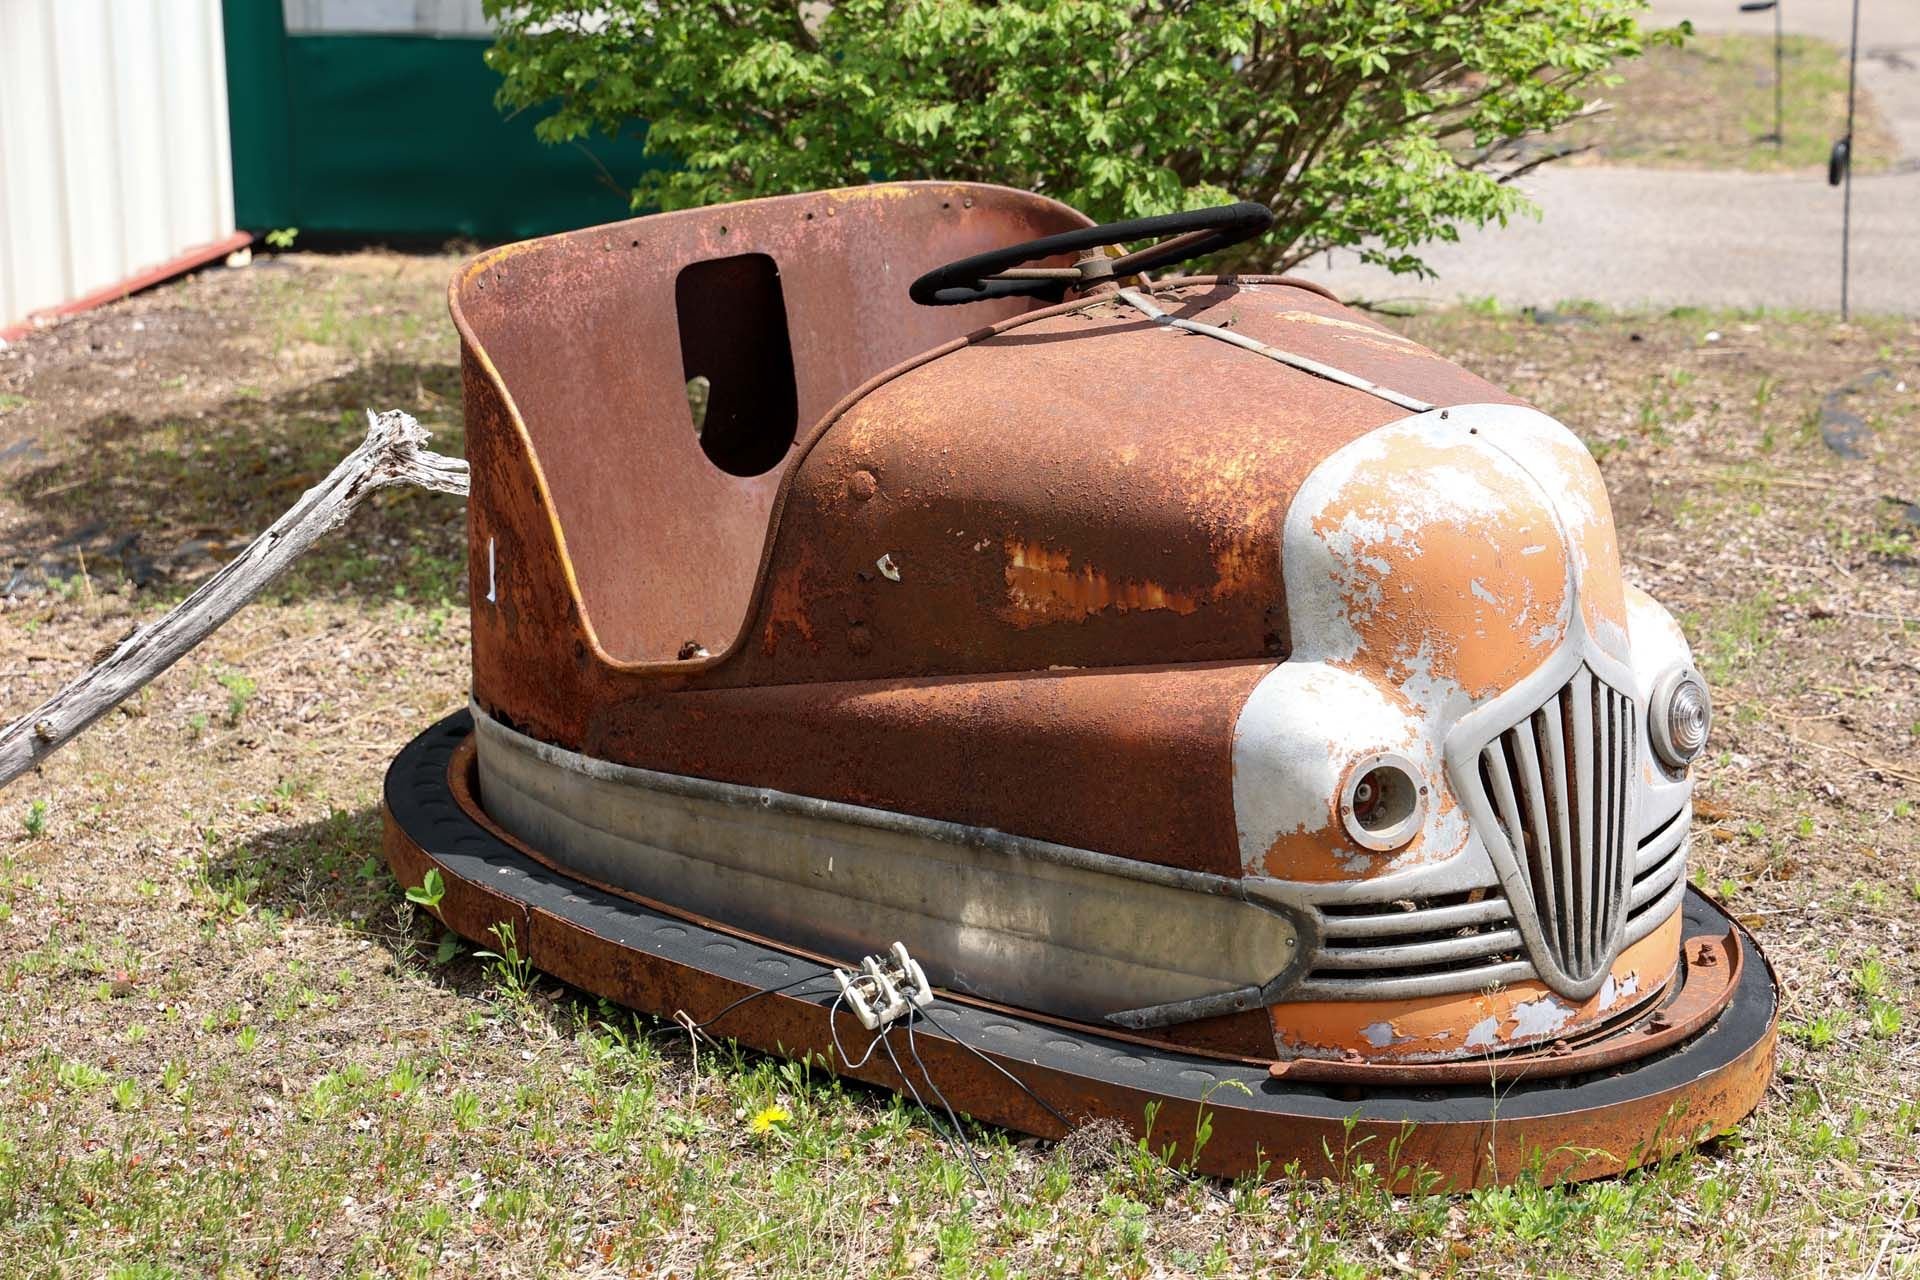 For Sale Lusse Auto Skooter Vintage Bumper Car in Original Condition